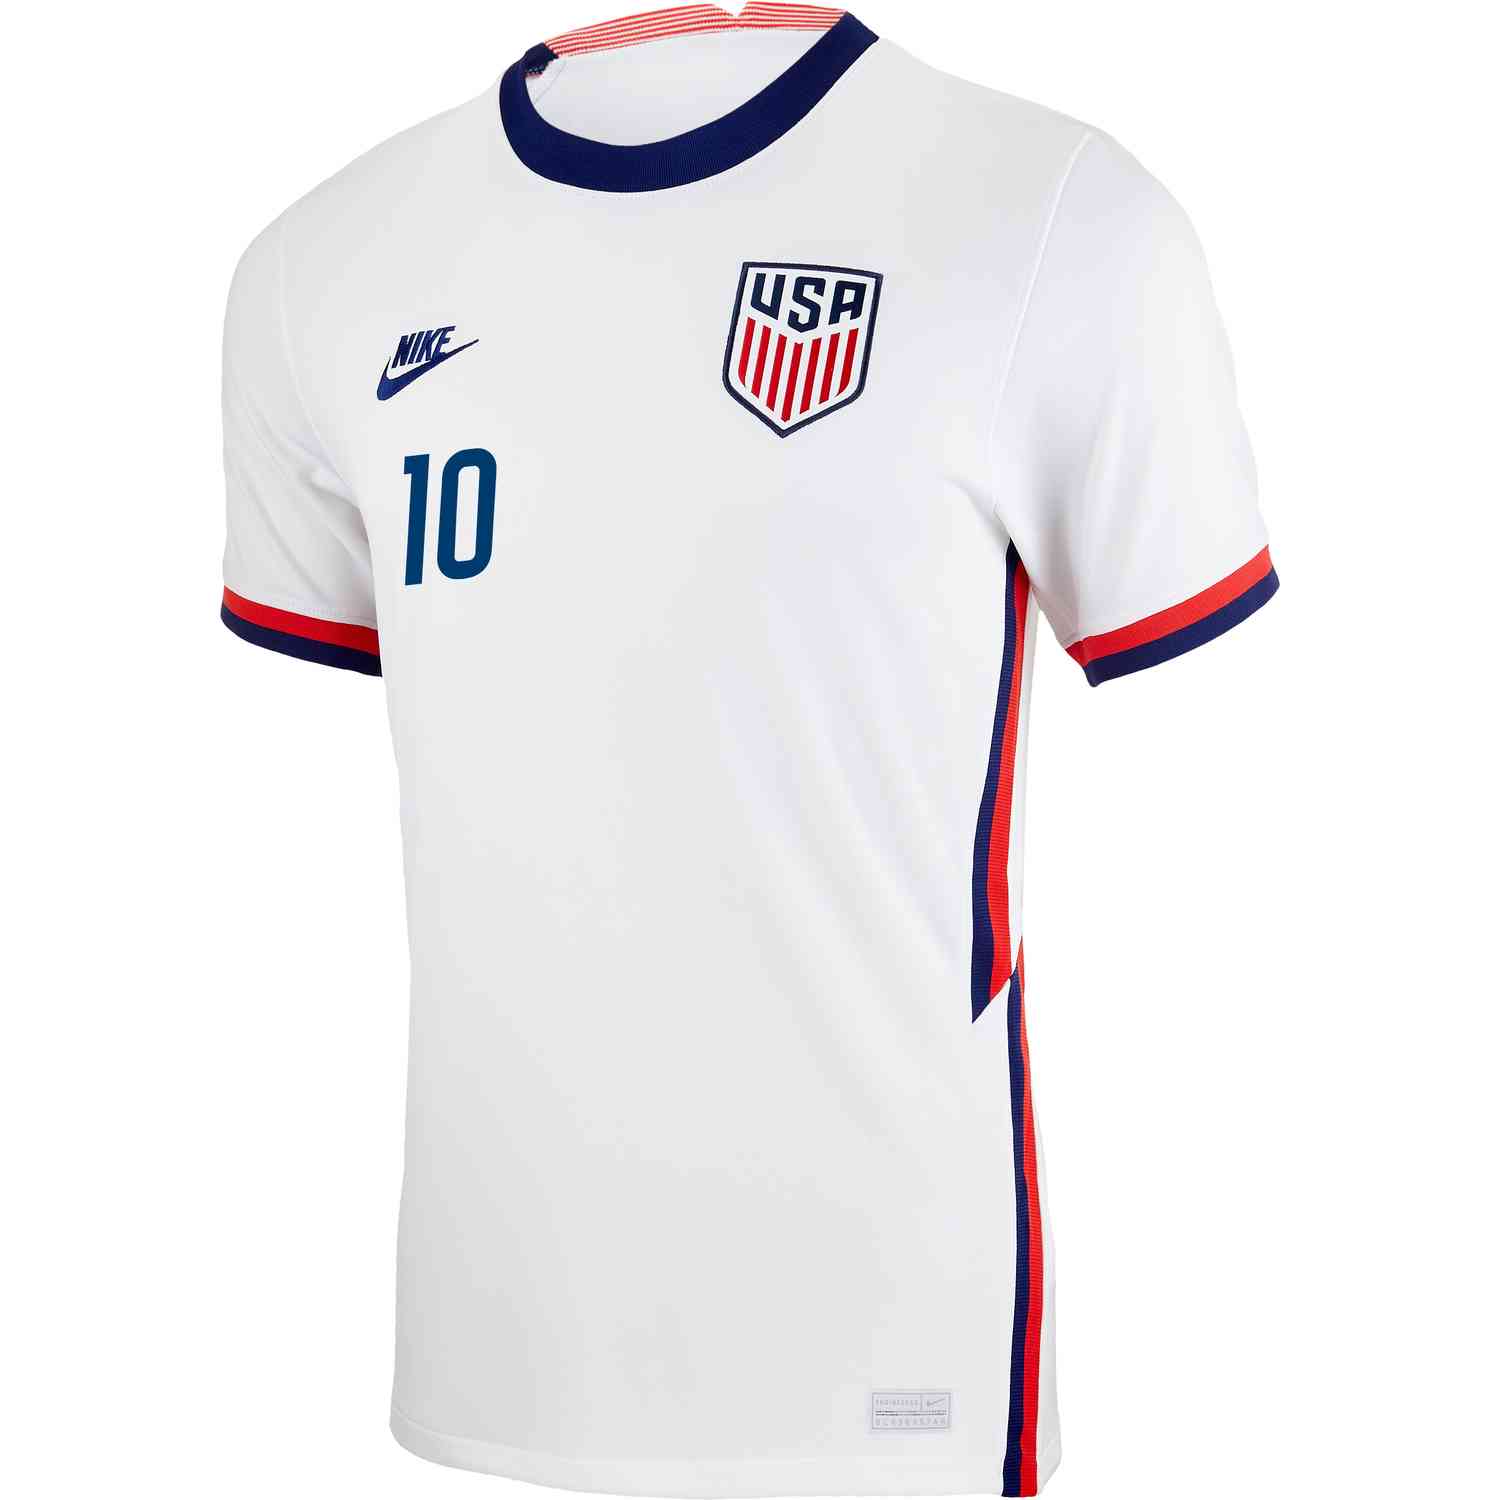 Keuhoms #10 Pulisic 2021/2022 Season National Team Away Kids/Youths Blue Soccer Sportswear Jersey & Shorts for Youth Sizes 